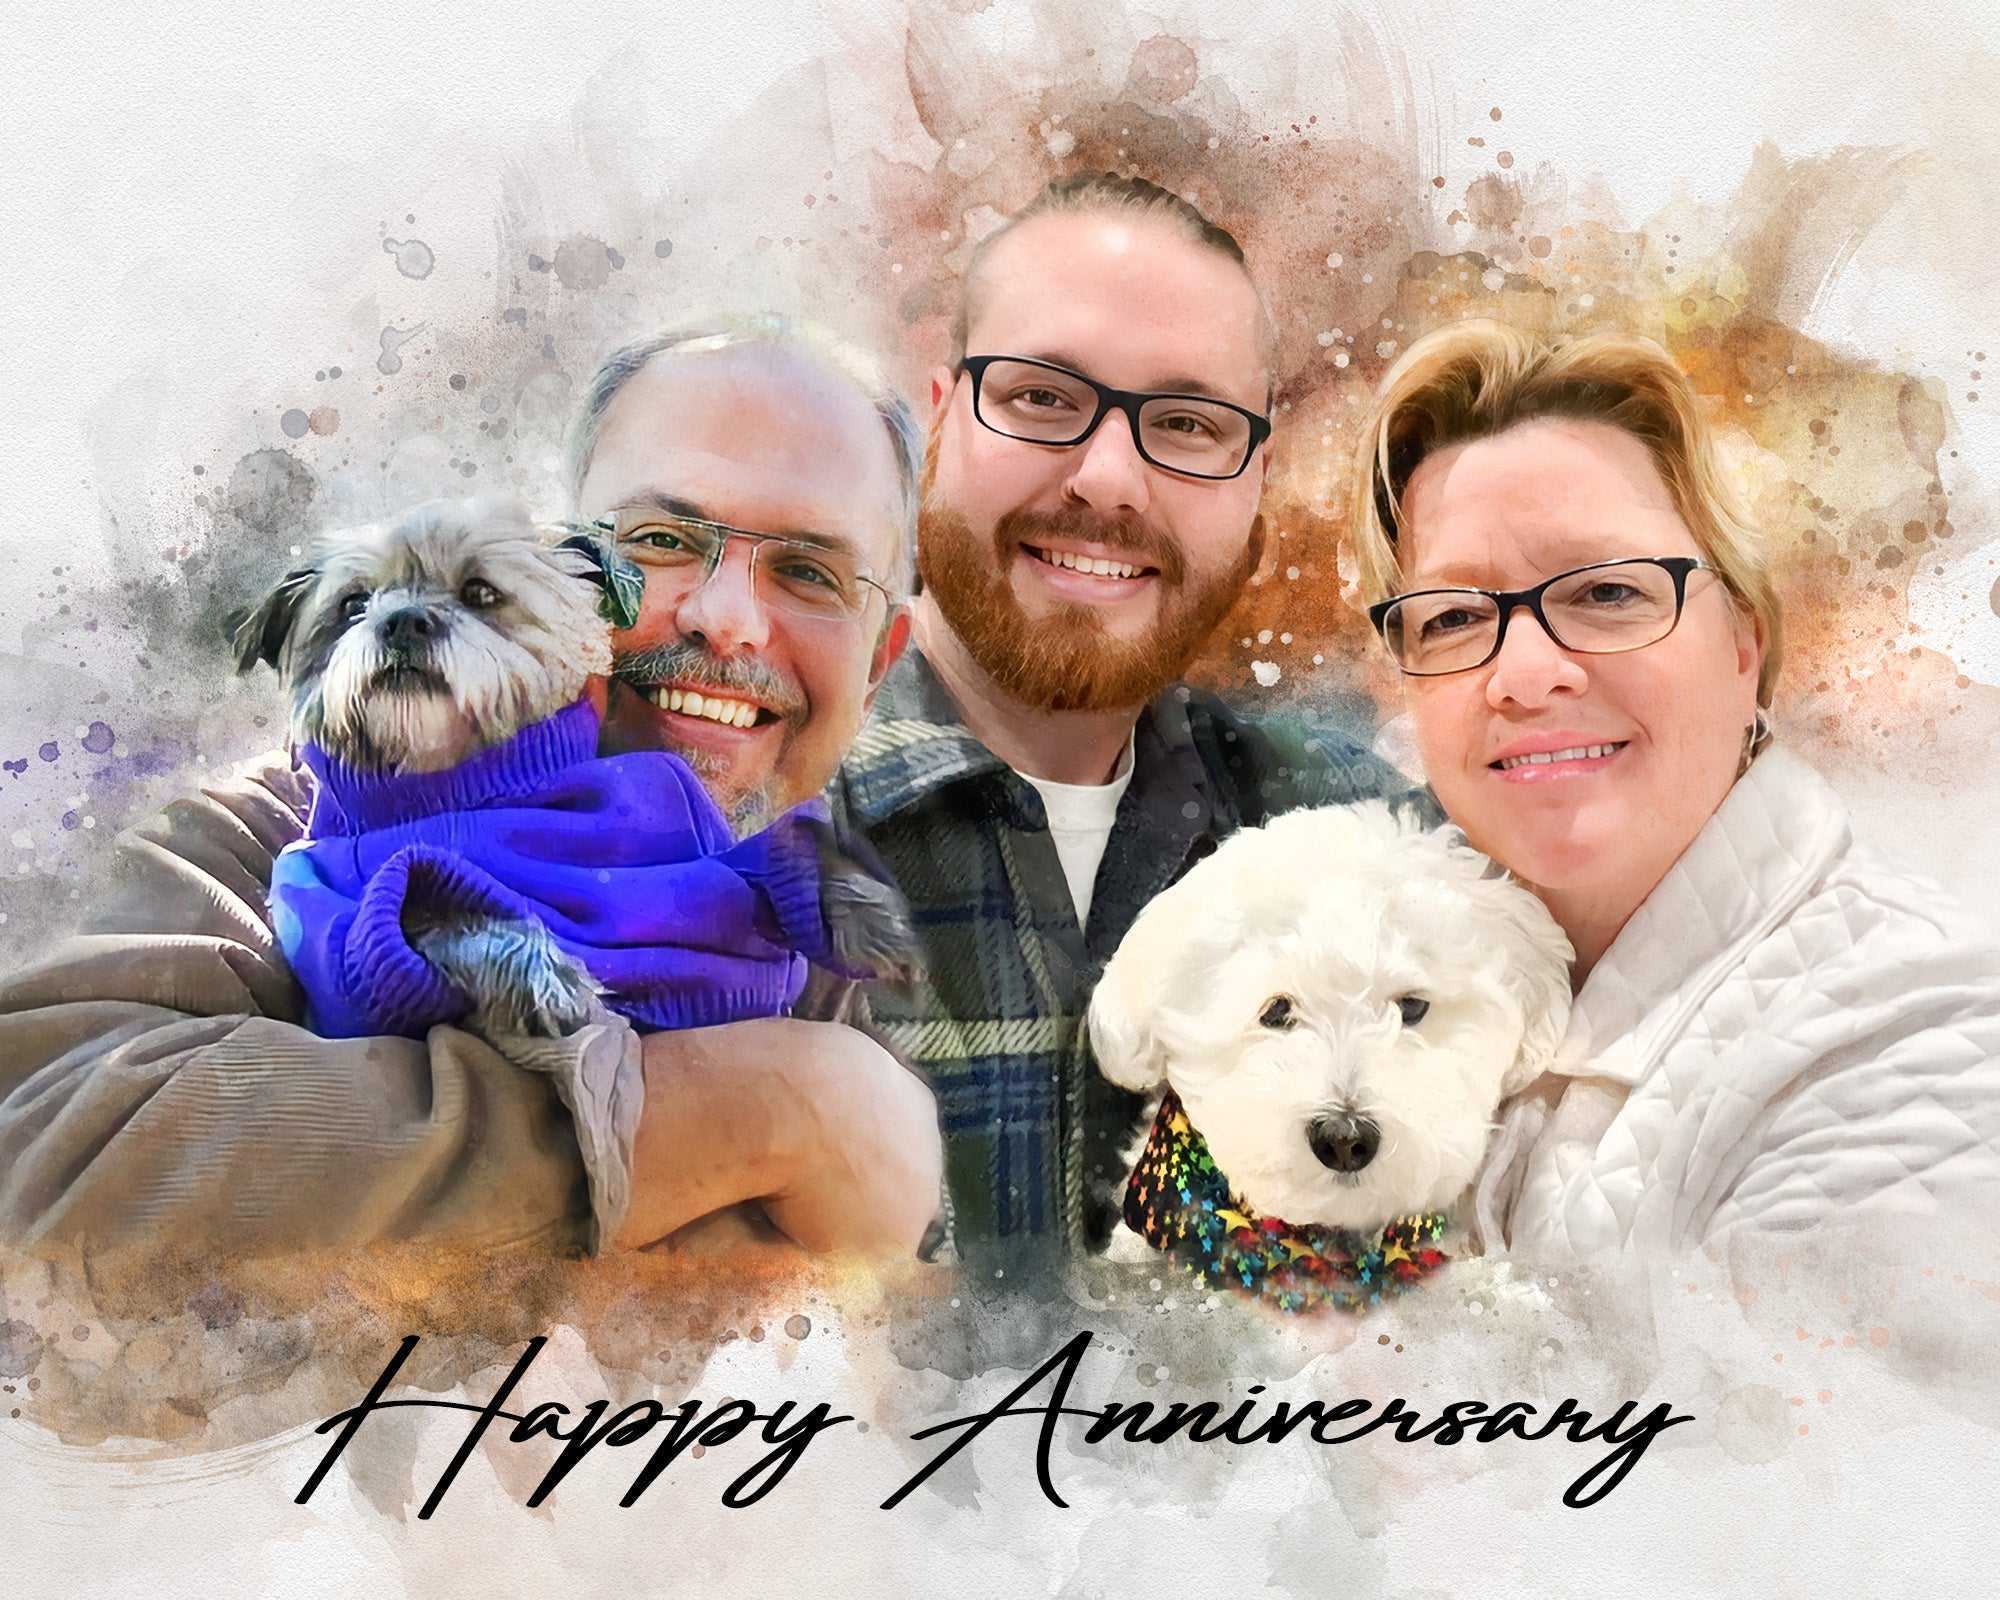 Anniversary Gift for the Love of your Life - FromPicToArt